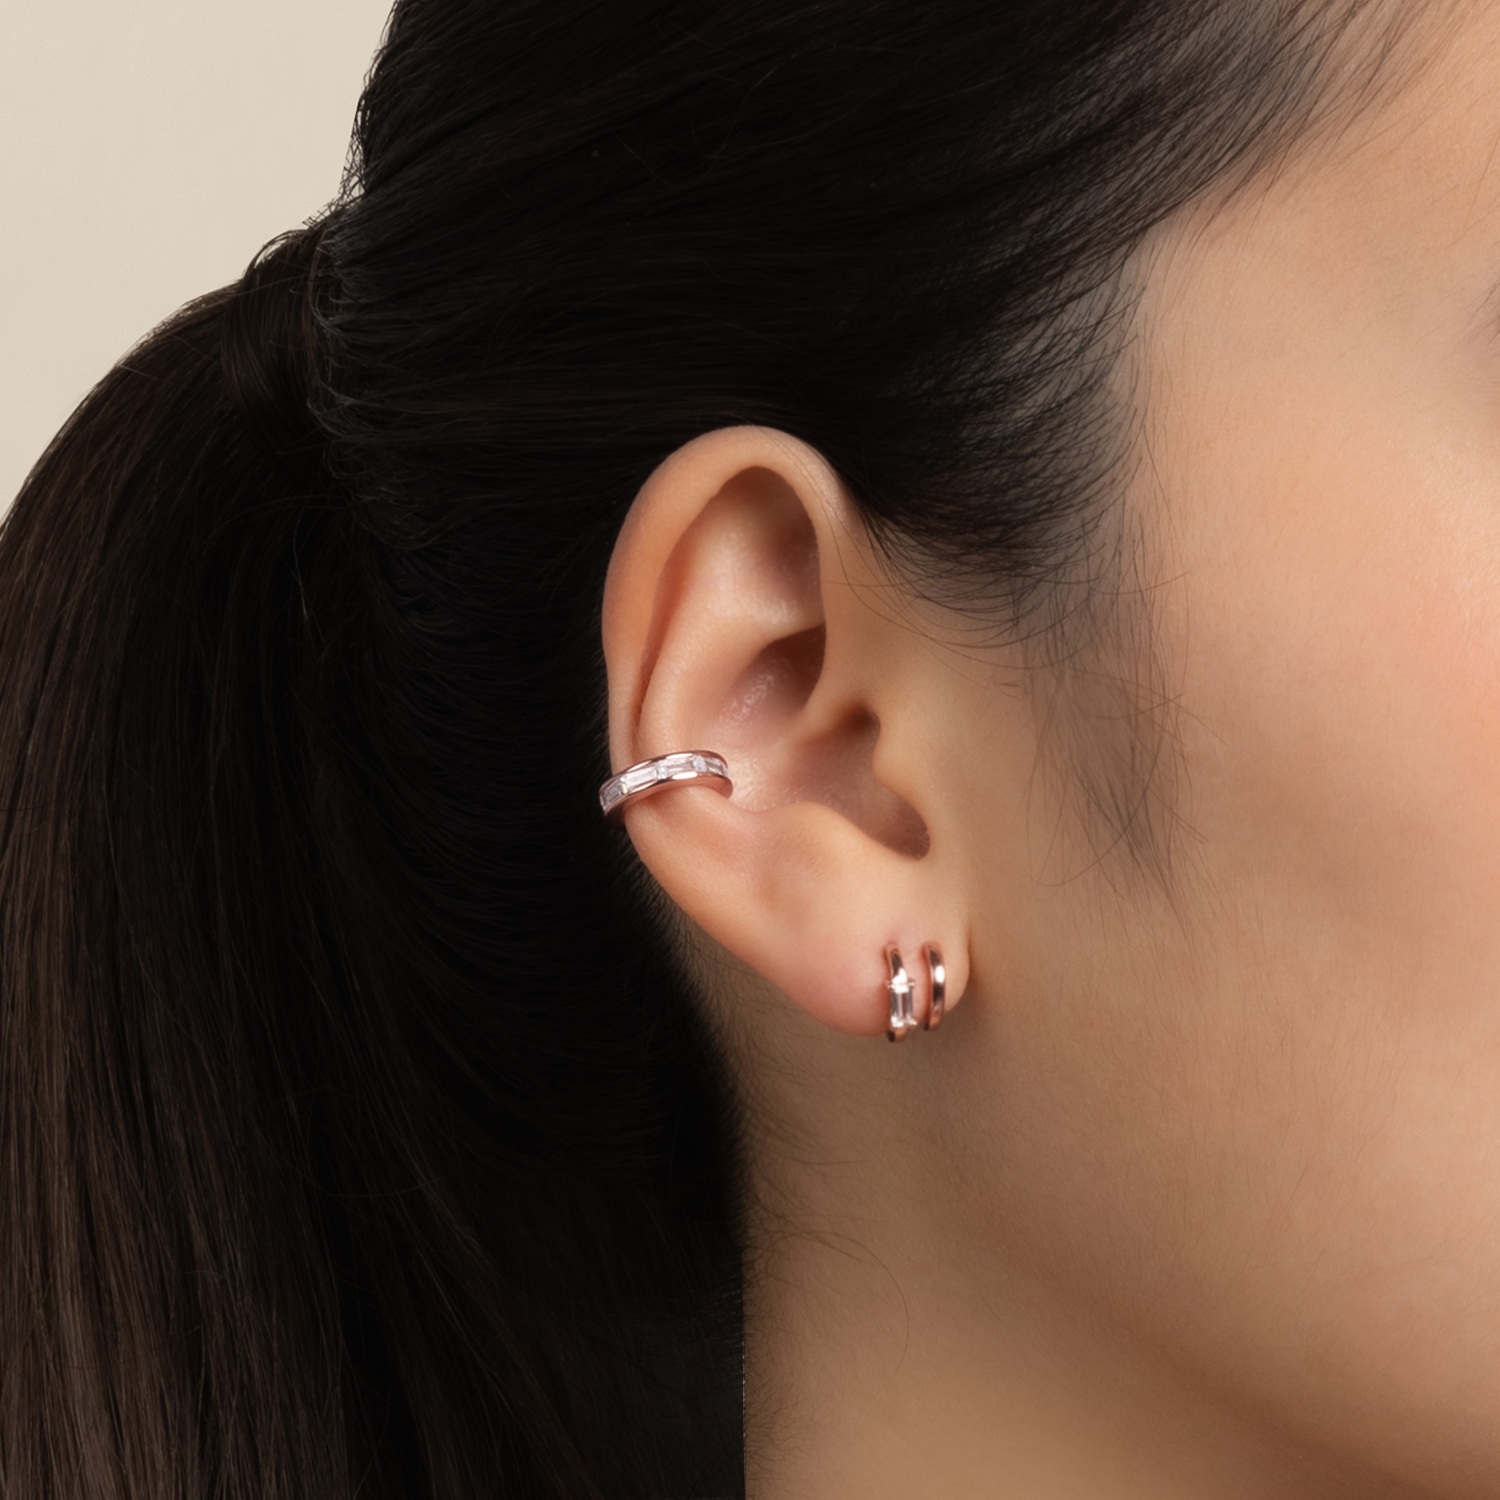 Model wears minimalist and classic ear cuff in rose gold with cubic zirconia